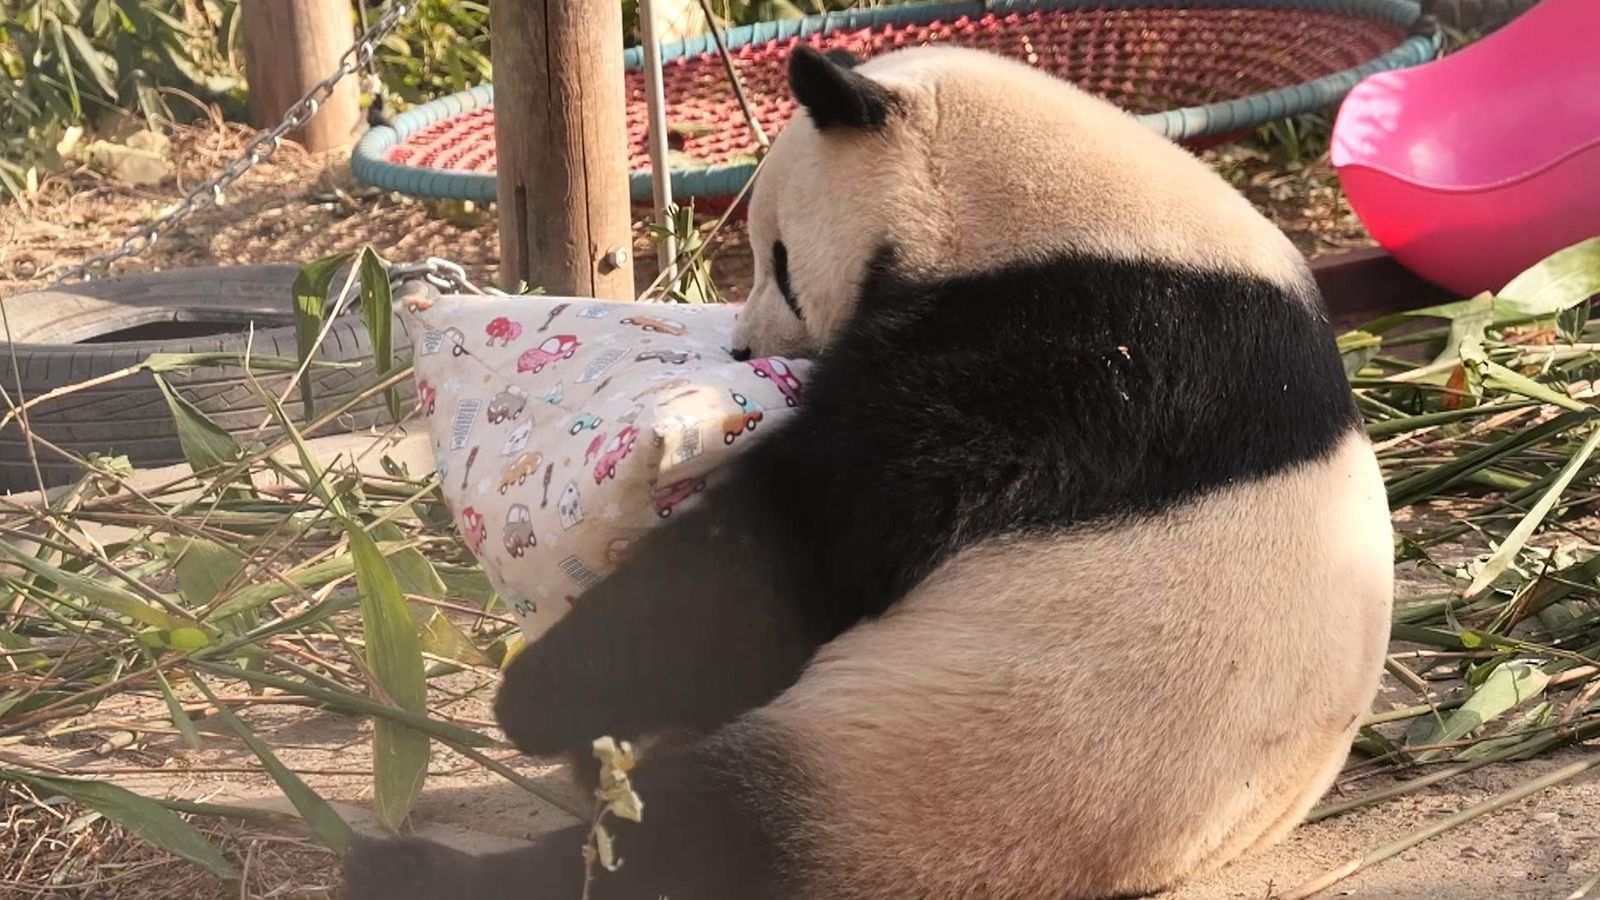 How China's pandas may reflect spiralling international relations with the West